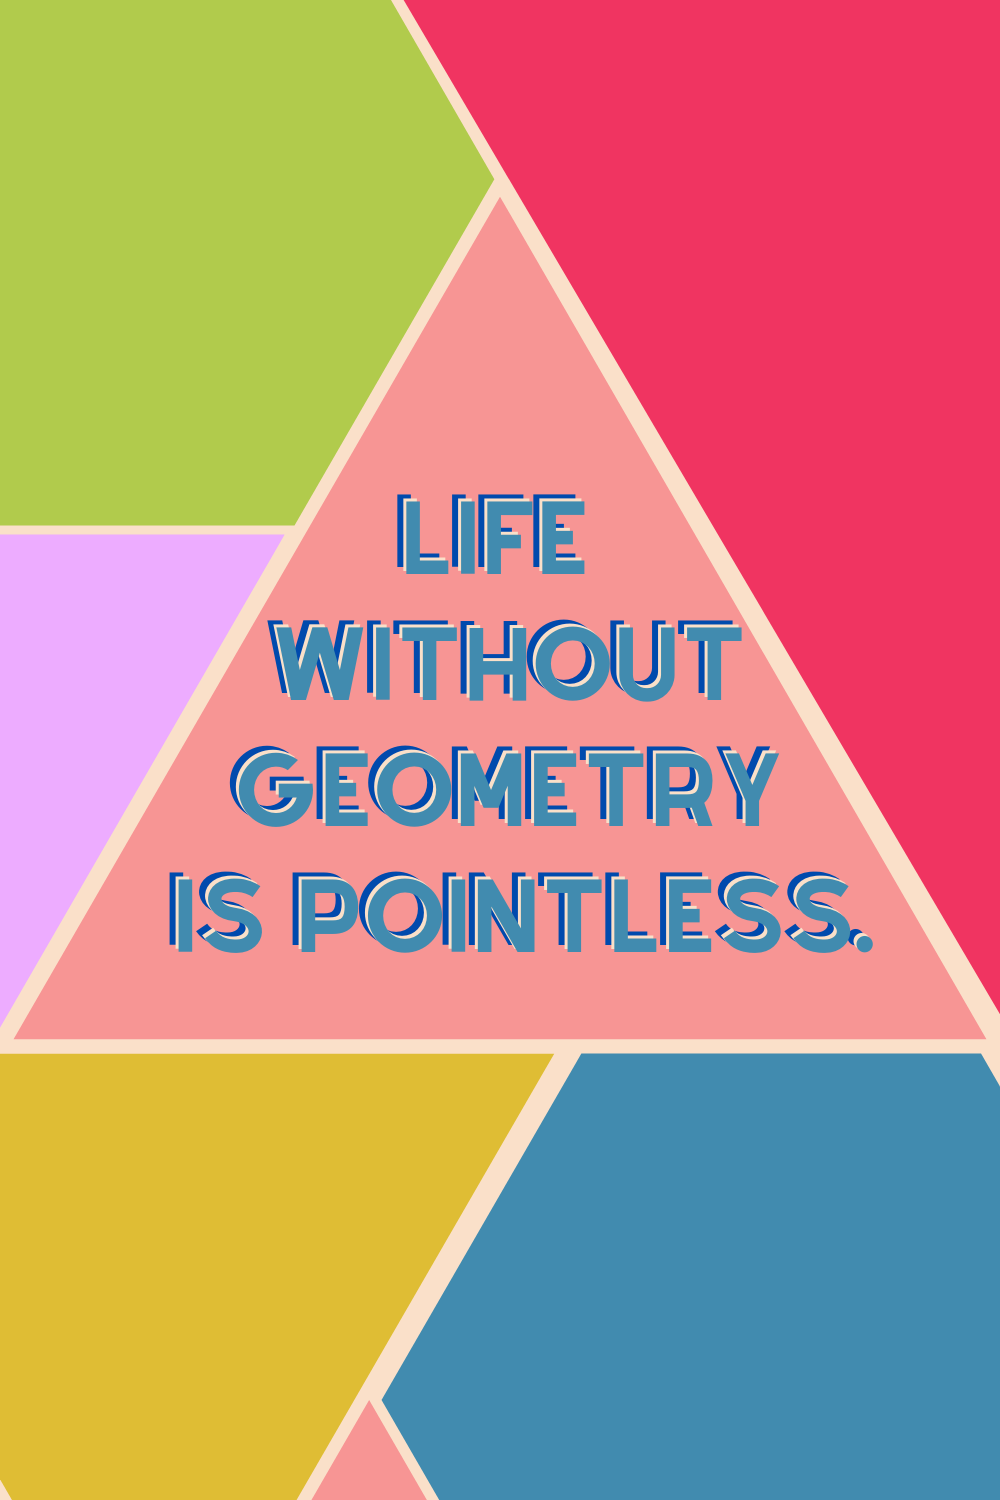 Hilarious Math Quotes With Image To Solve All Your Problems